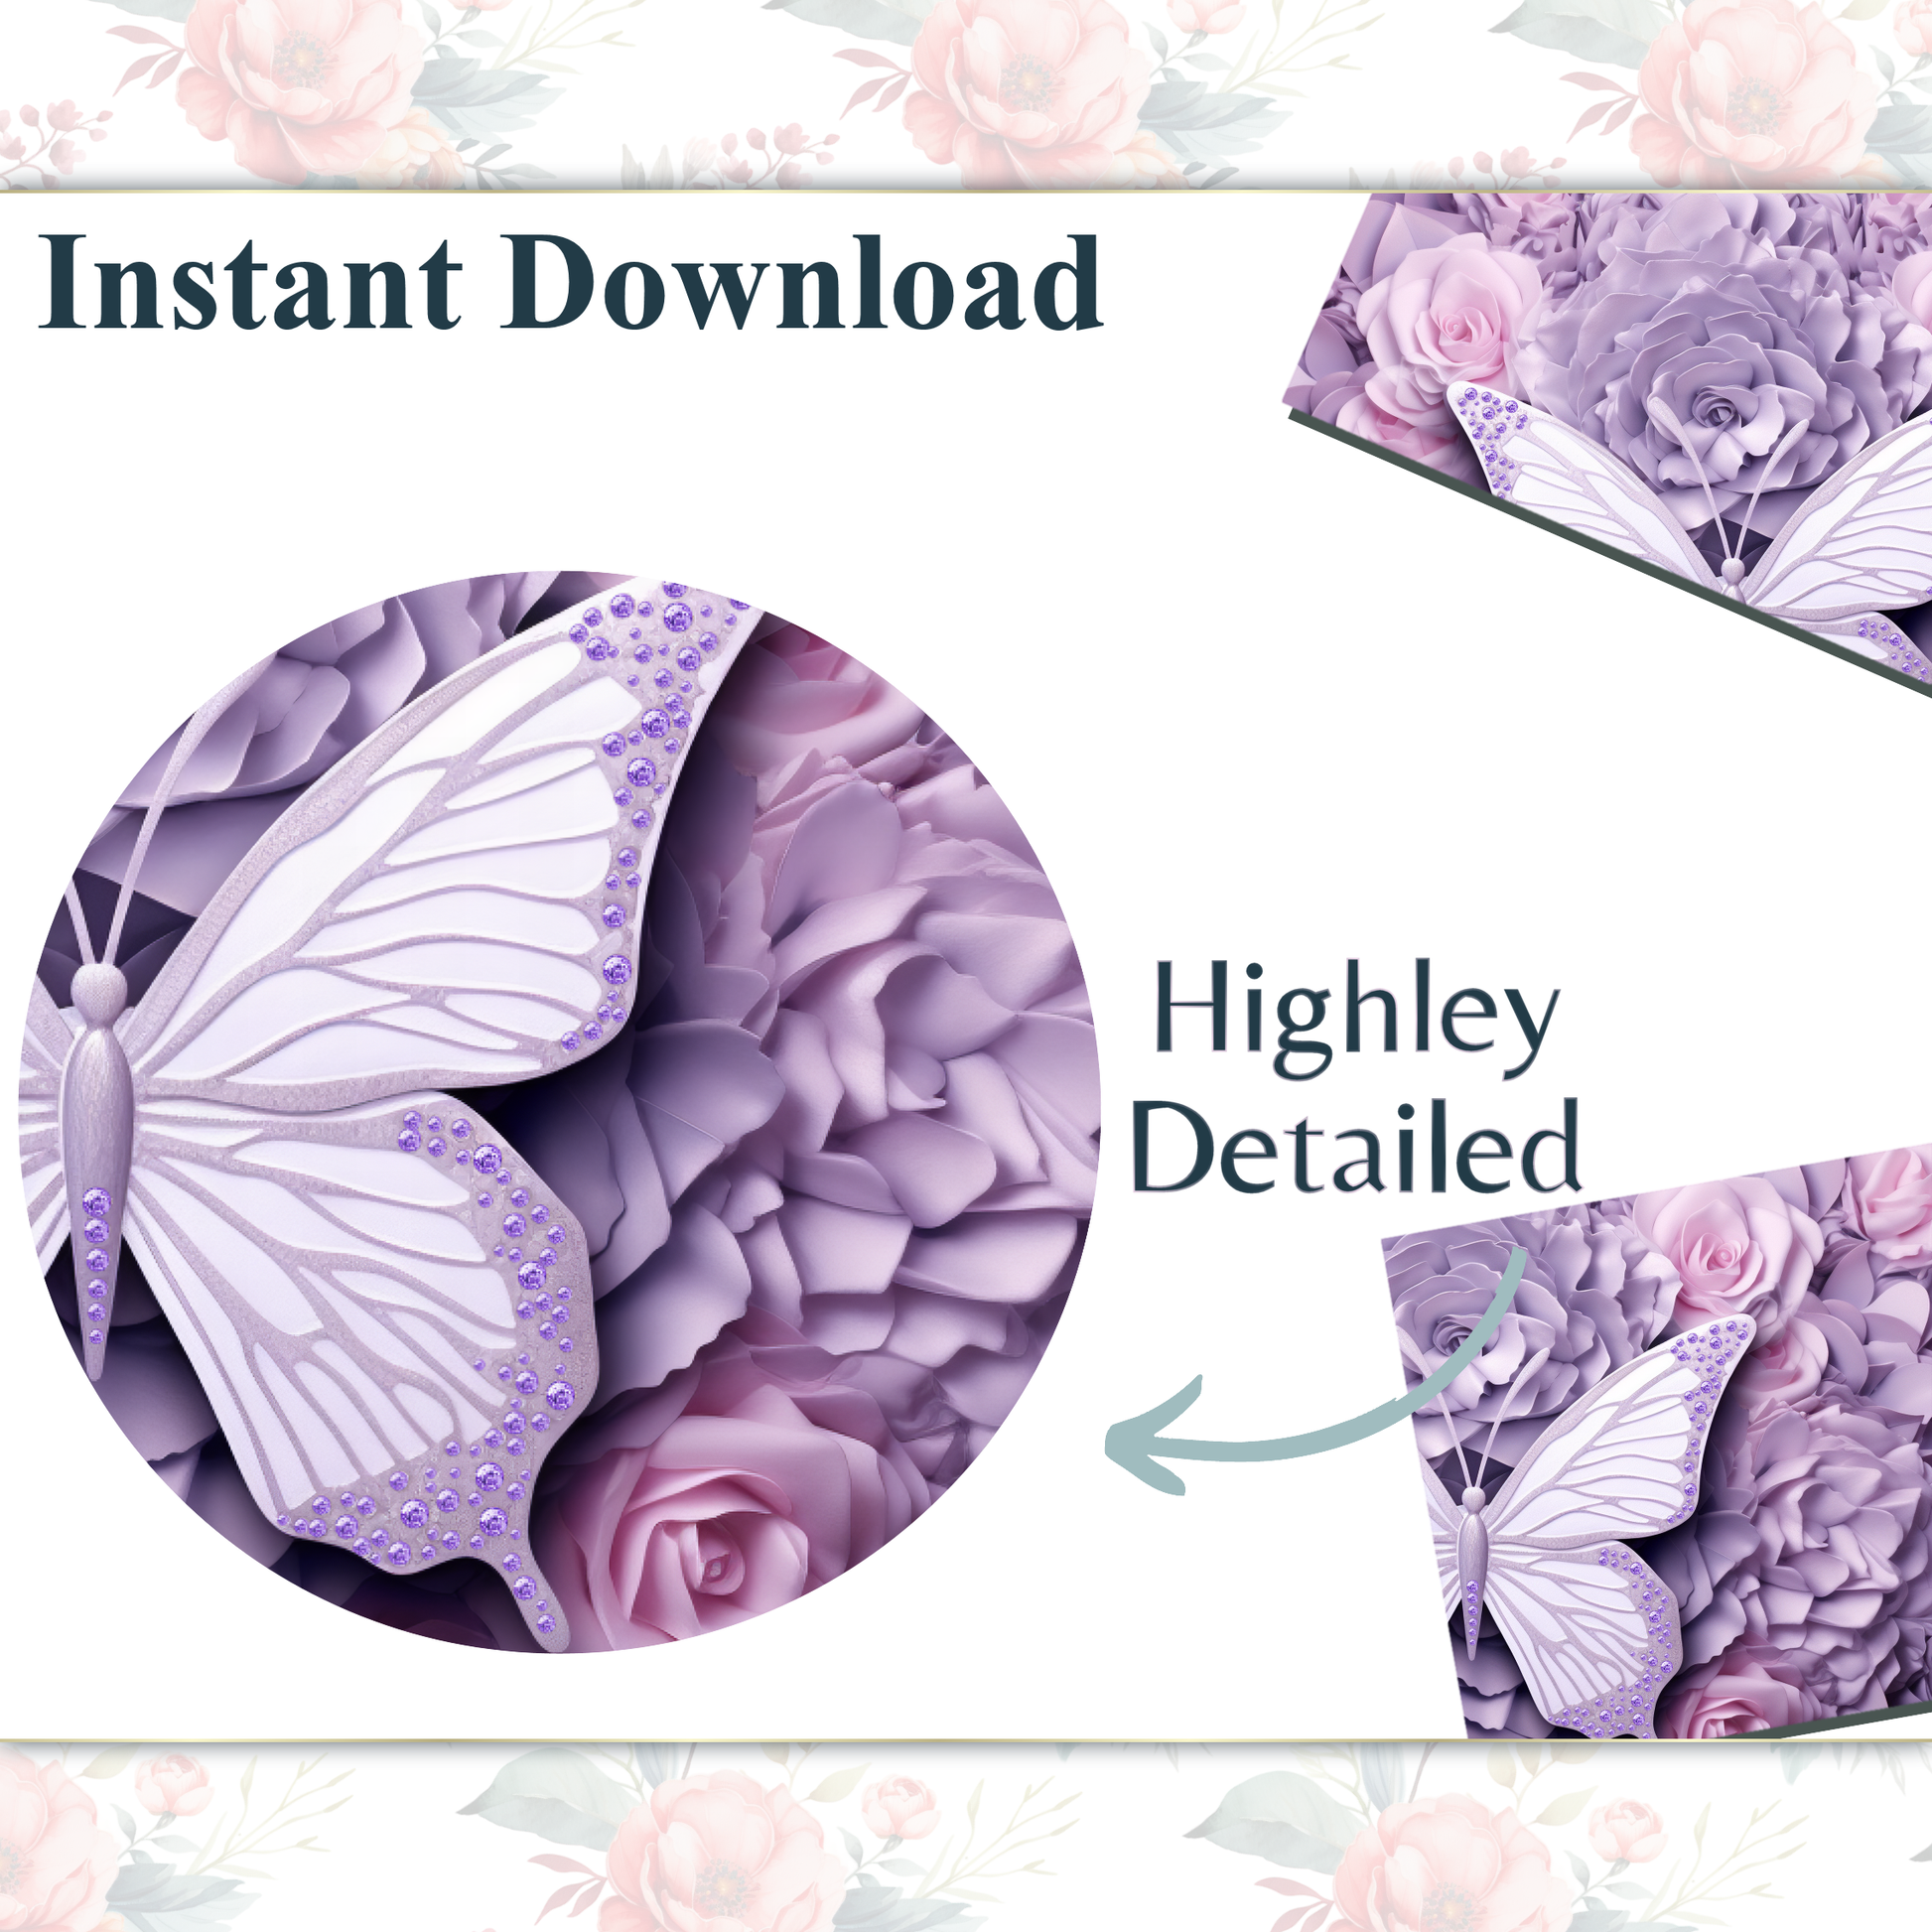 3D Purple Butterfly and Roses Clipart Tumbler Wrap